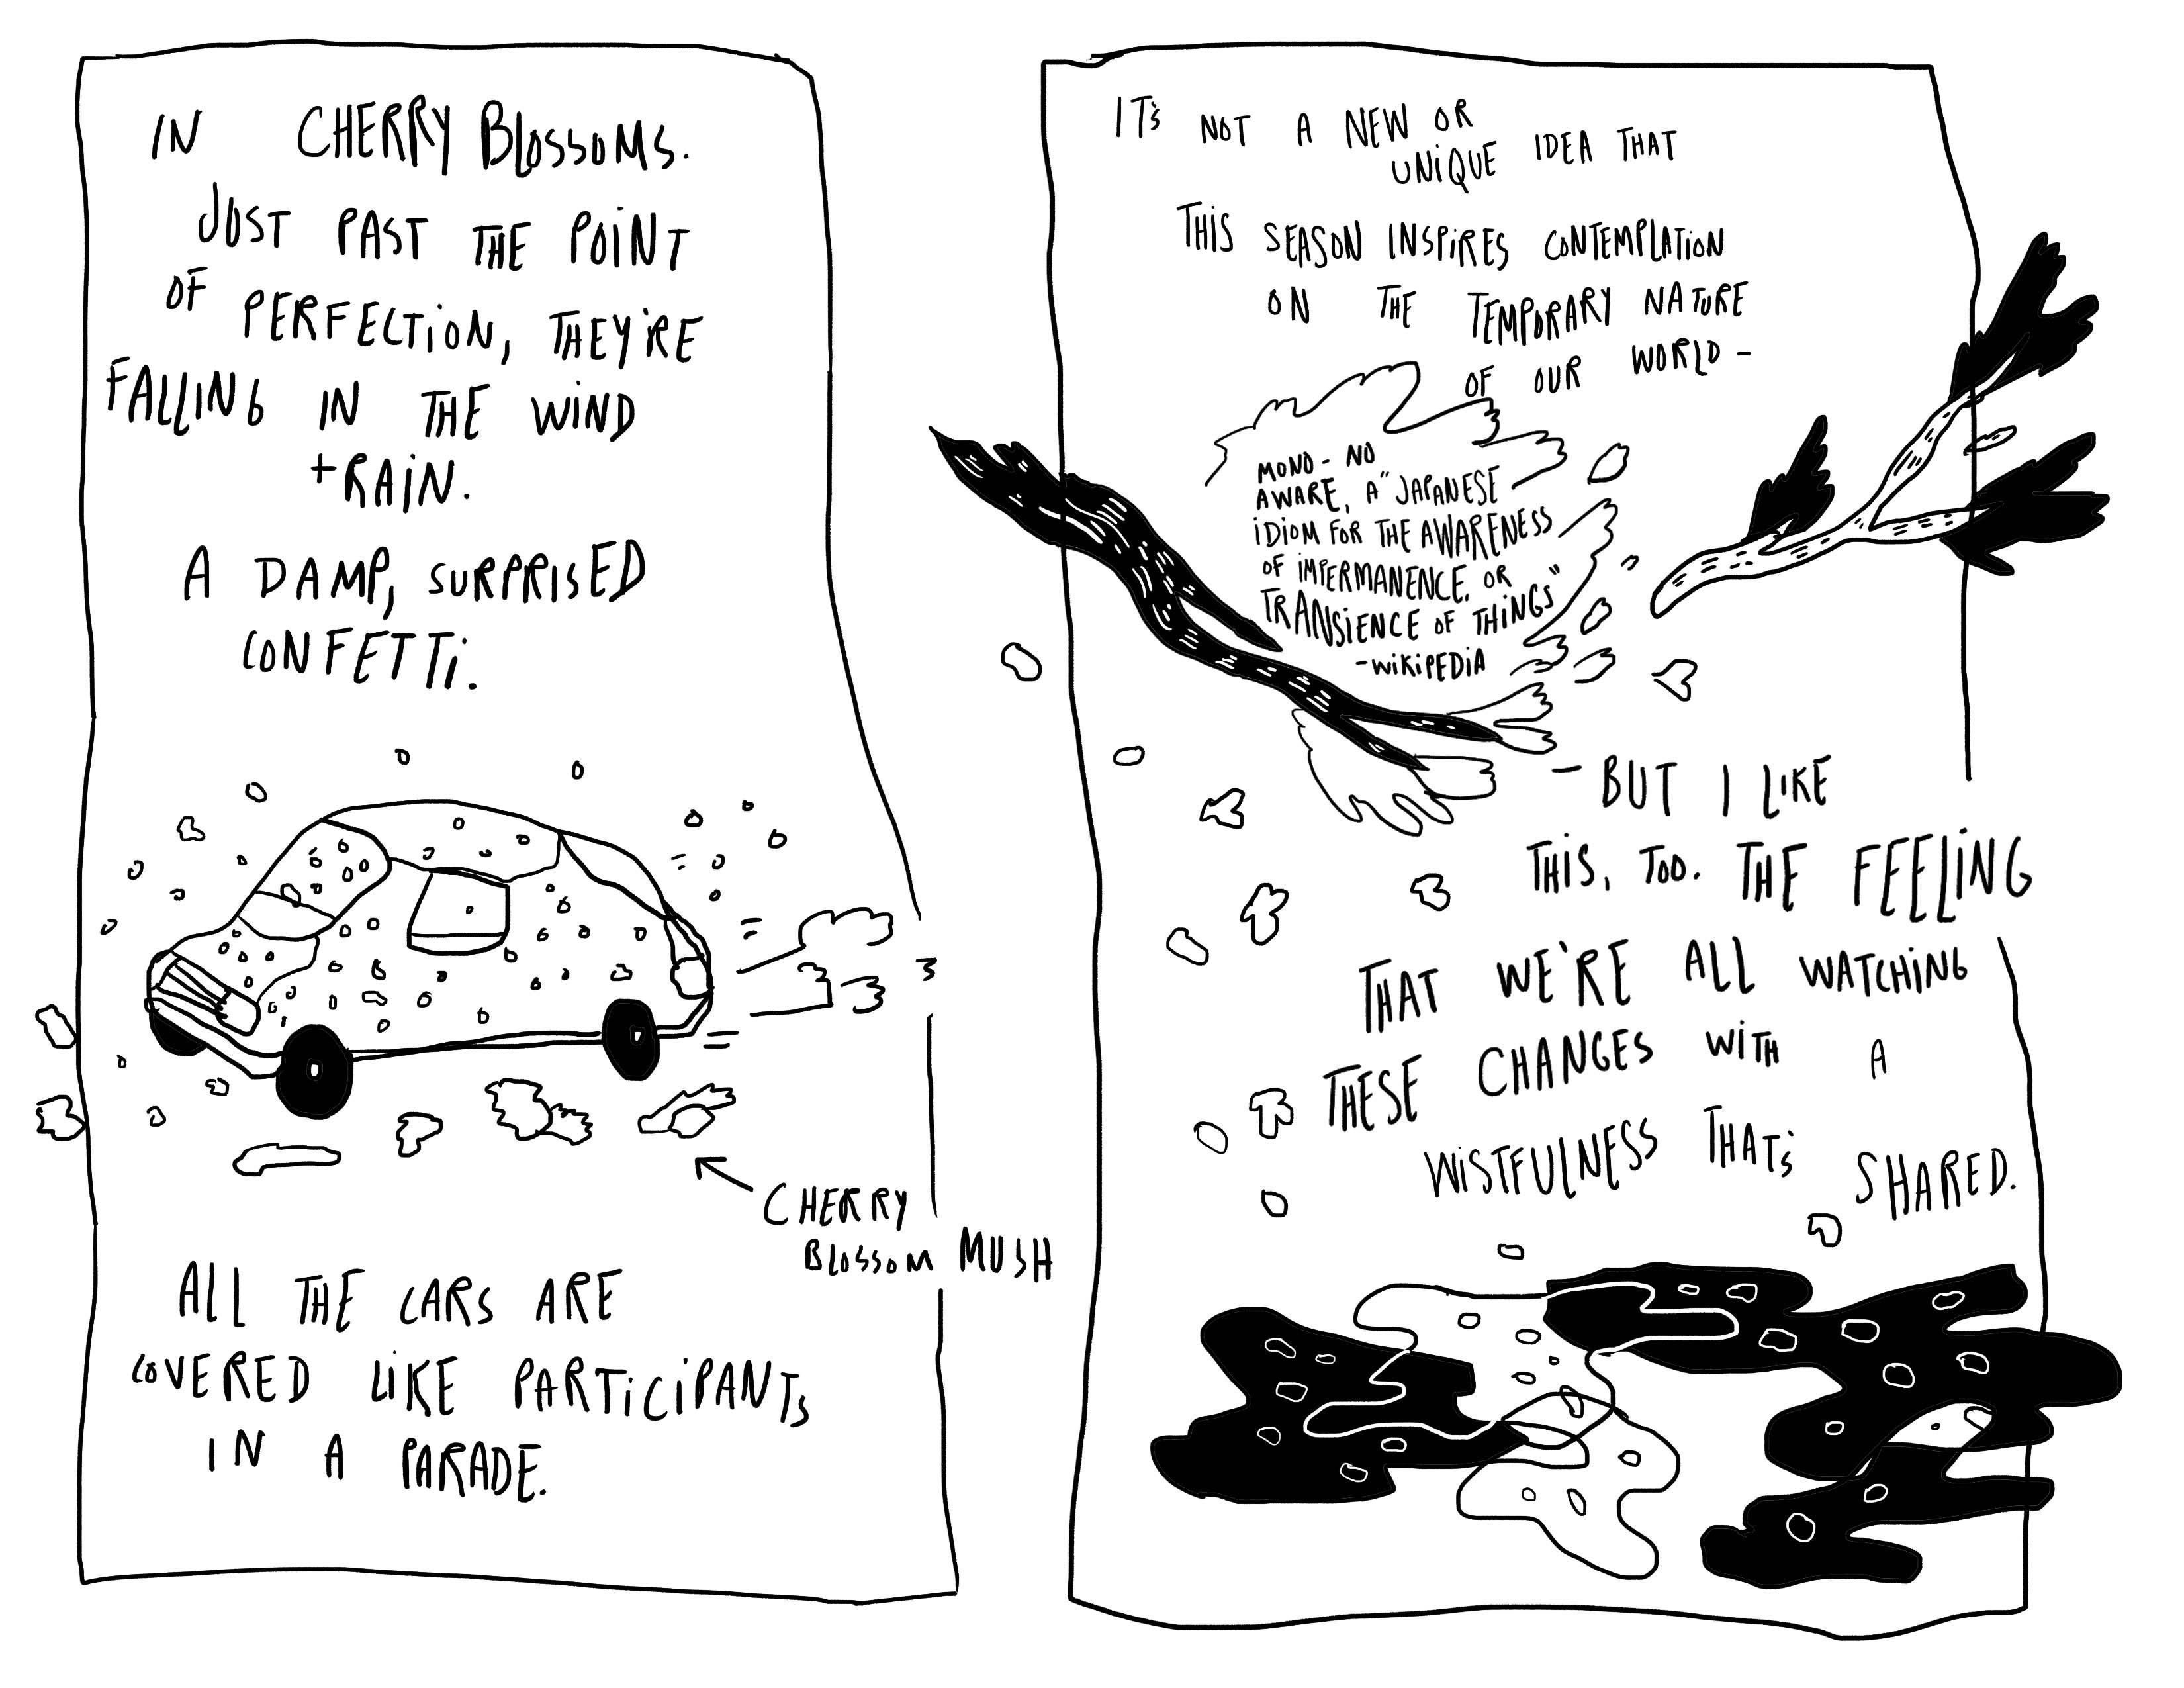 a comic featuring drawings of a car covered in cherry blossoms and a tree branch plus the following text: in cherry blossoms. Just past the point of perception, they're falling in the wind & rain. A damp, surprised confetti. All the cars are covered like participants in a parade. It's not a new or unique idea that this season inspires contemplation on the temporary nature of our world—mono-no aware, a Japanese idiom for the awareness of impermanence, or transience of things—but I like this, too. The feeling that we're all watching these changes with a wistfulness that's shared.